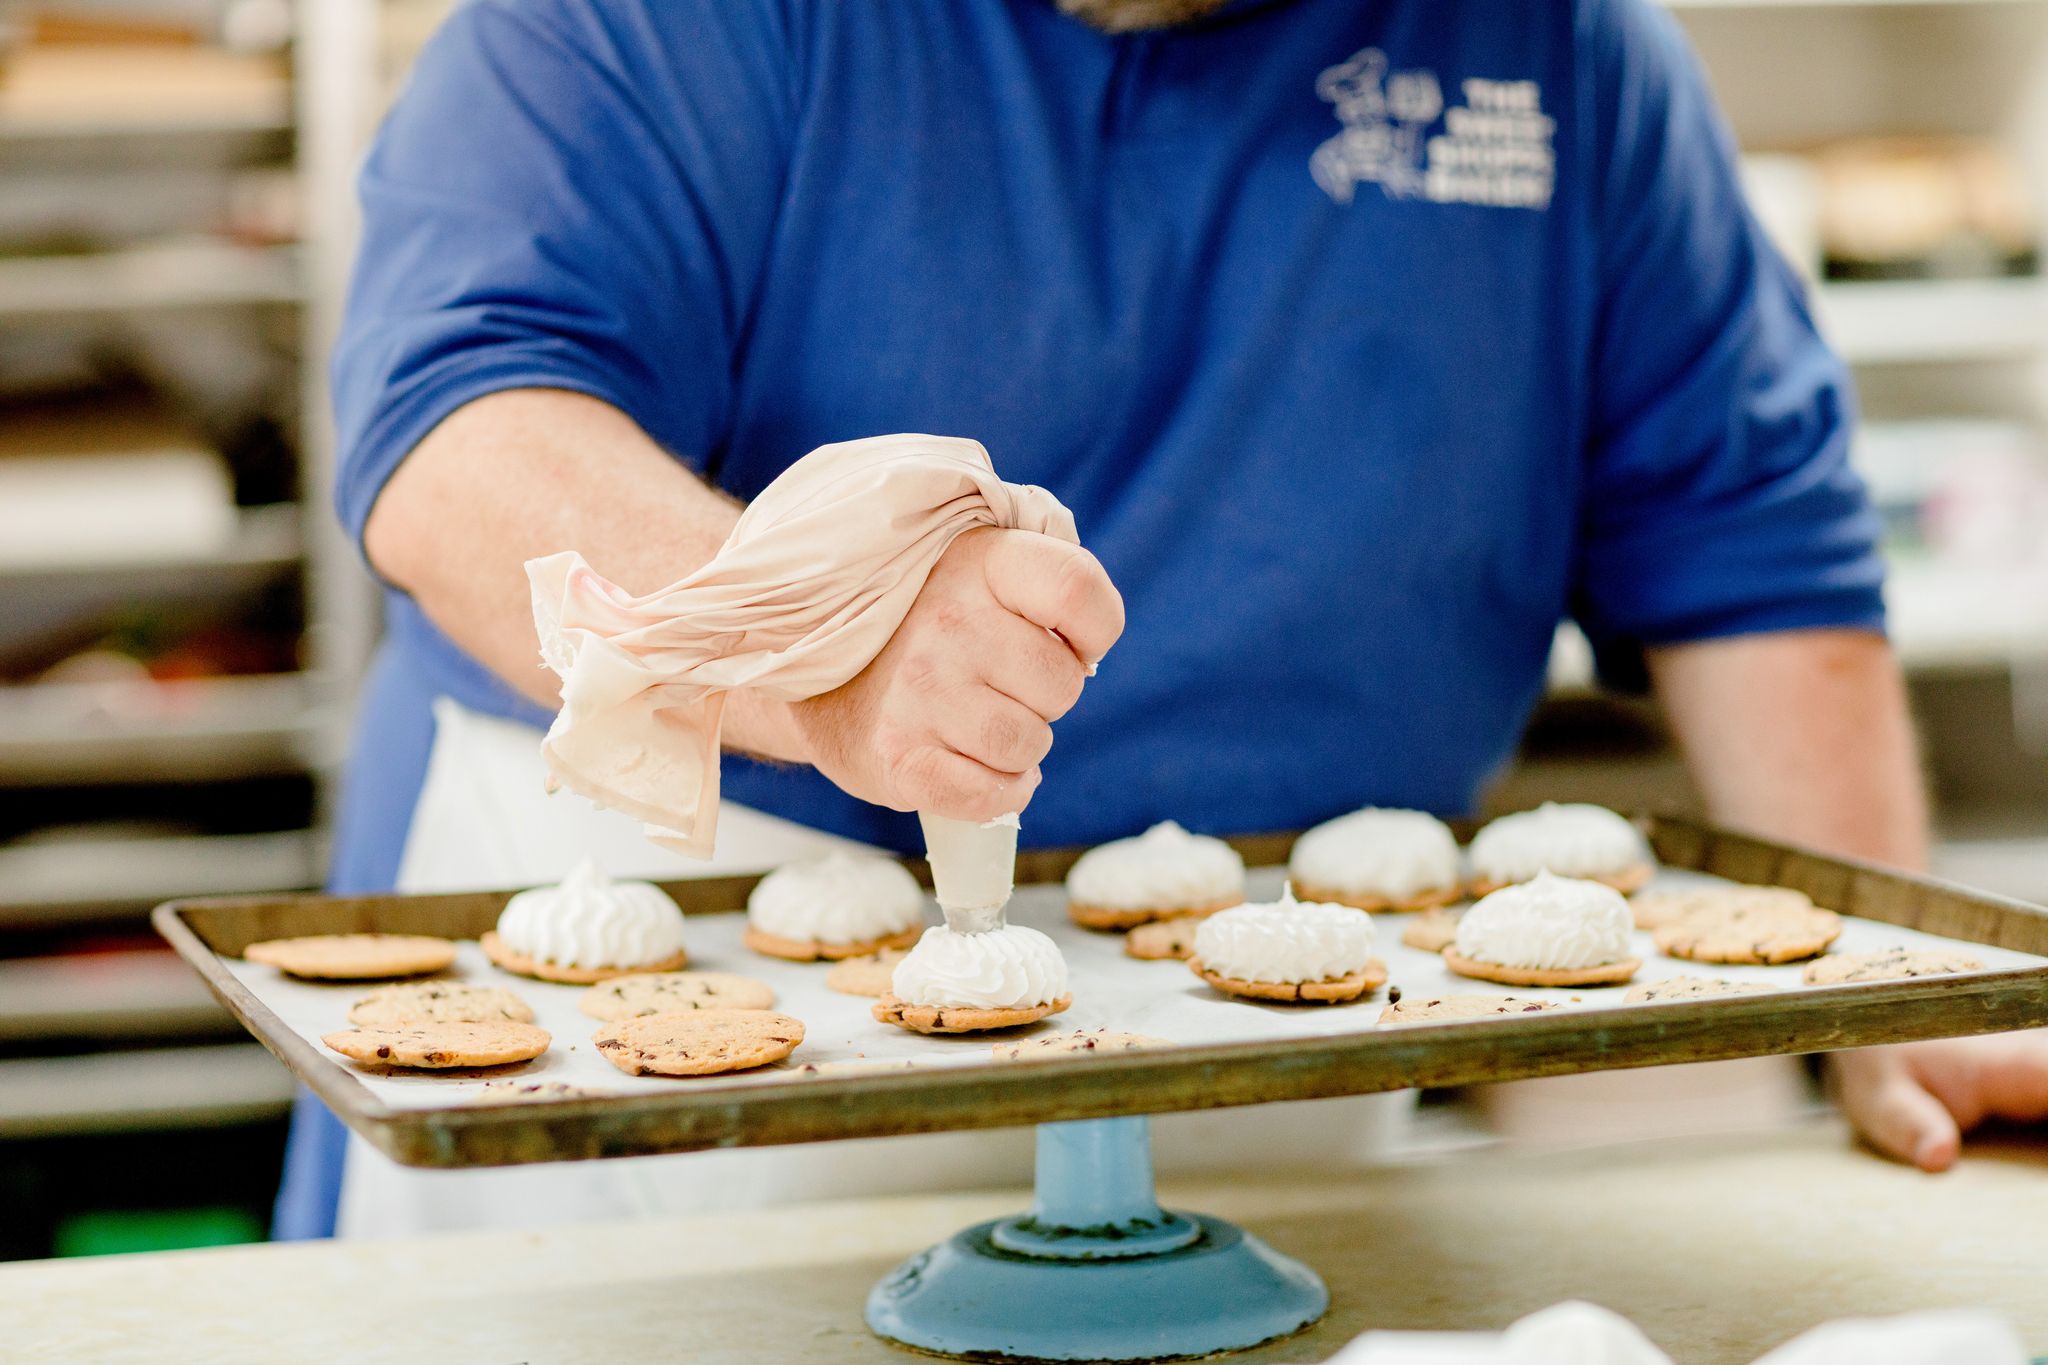 Ken Cagle Jr. decorates cookies at Sweet Shoppe Bakery in High Point, NC.